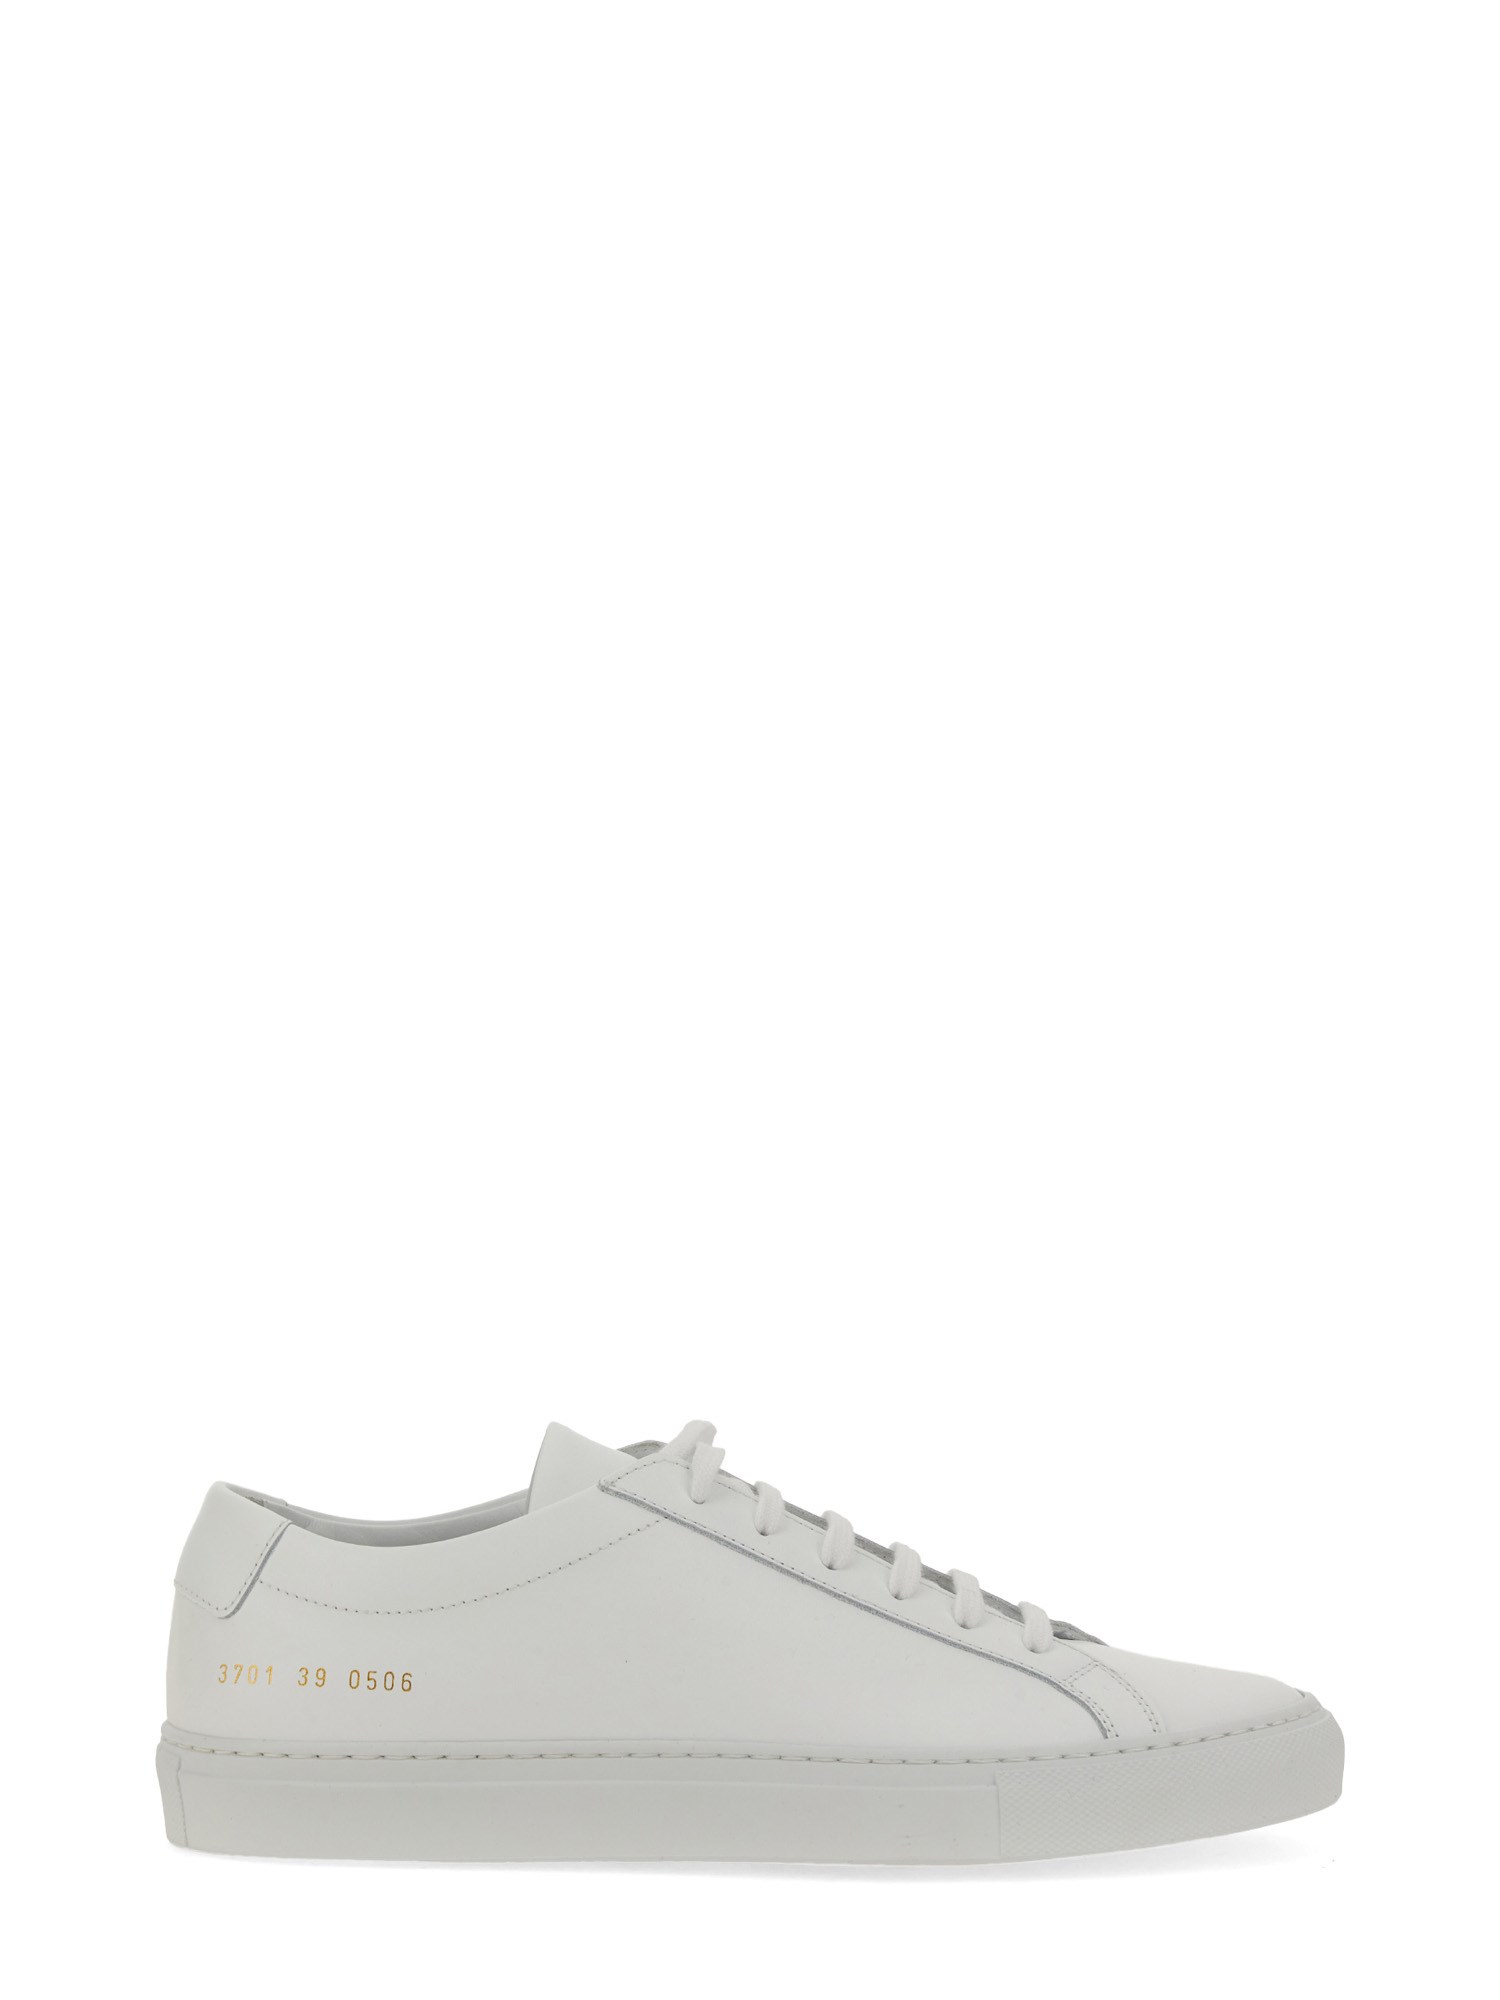 COMMON PROJECTS common projects sneaker low original achilles